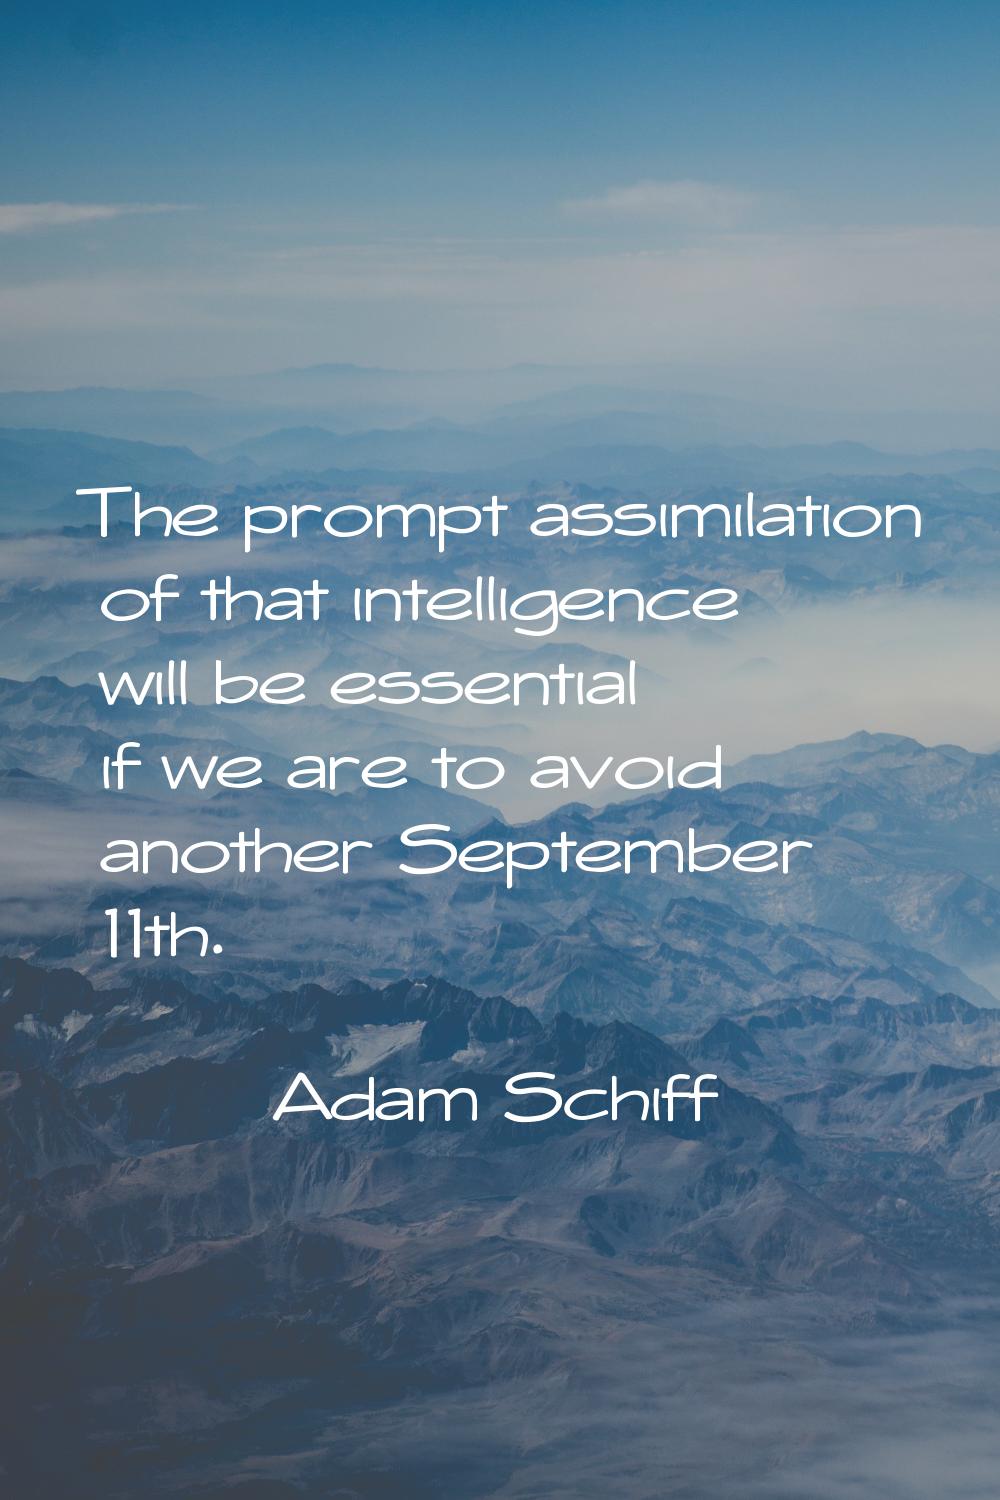 The prompt assimilation of that intelligence will be essential if we are to avoid another September